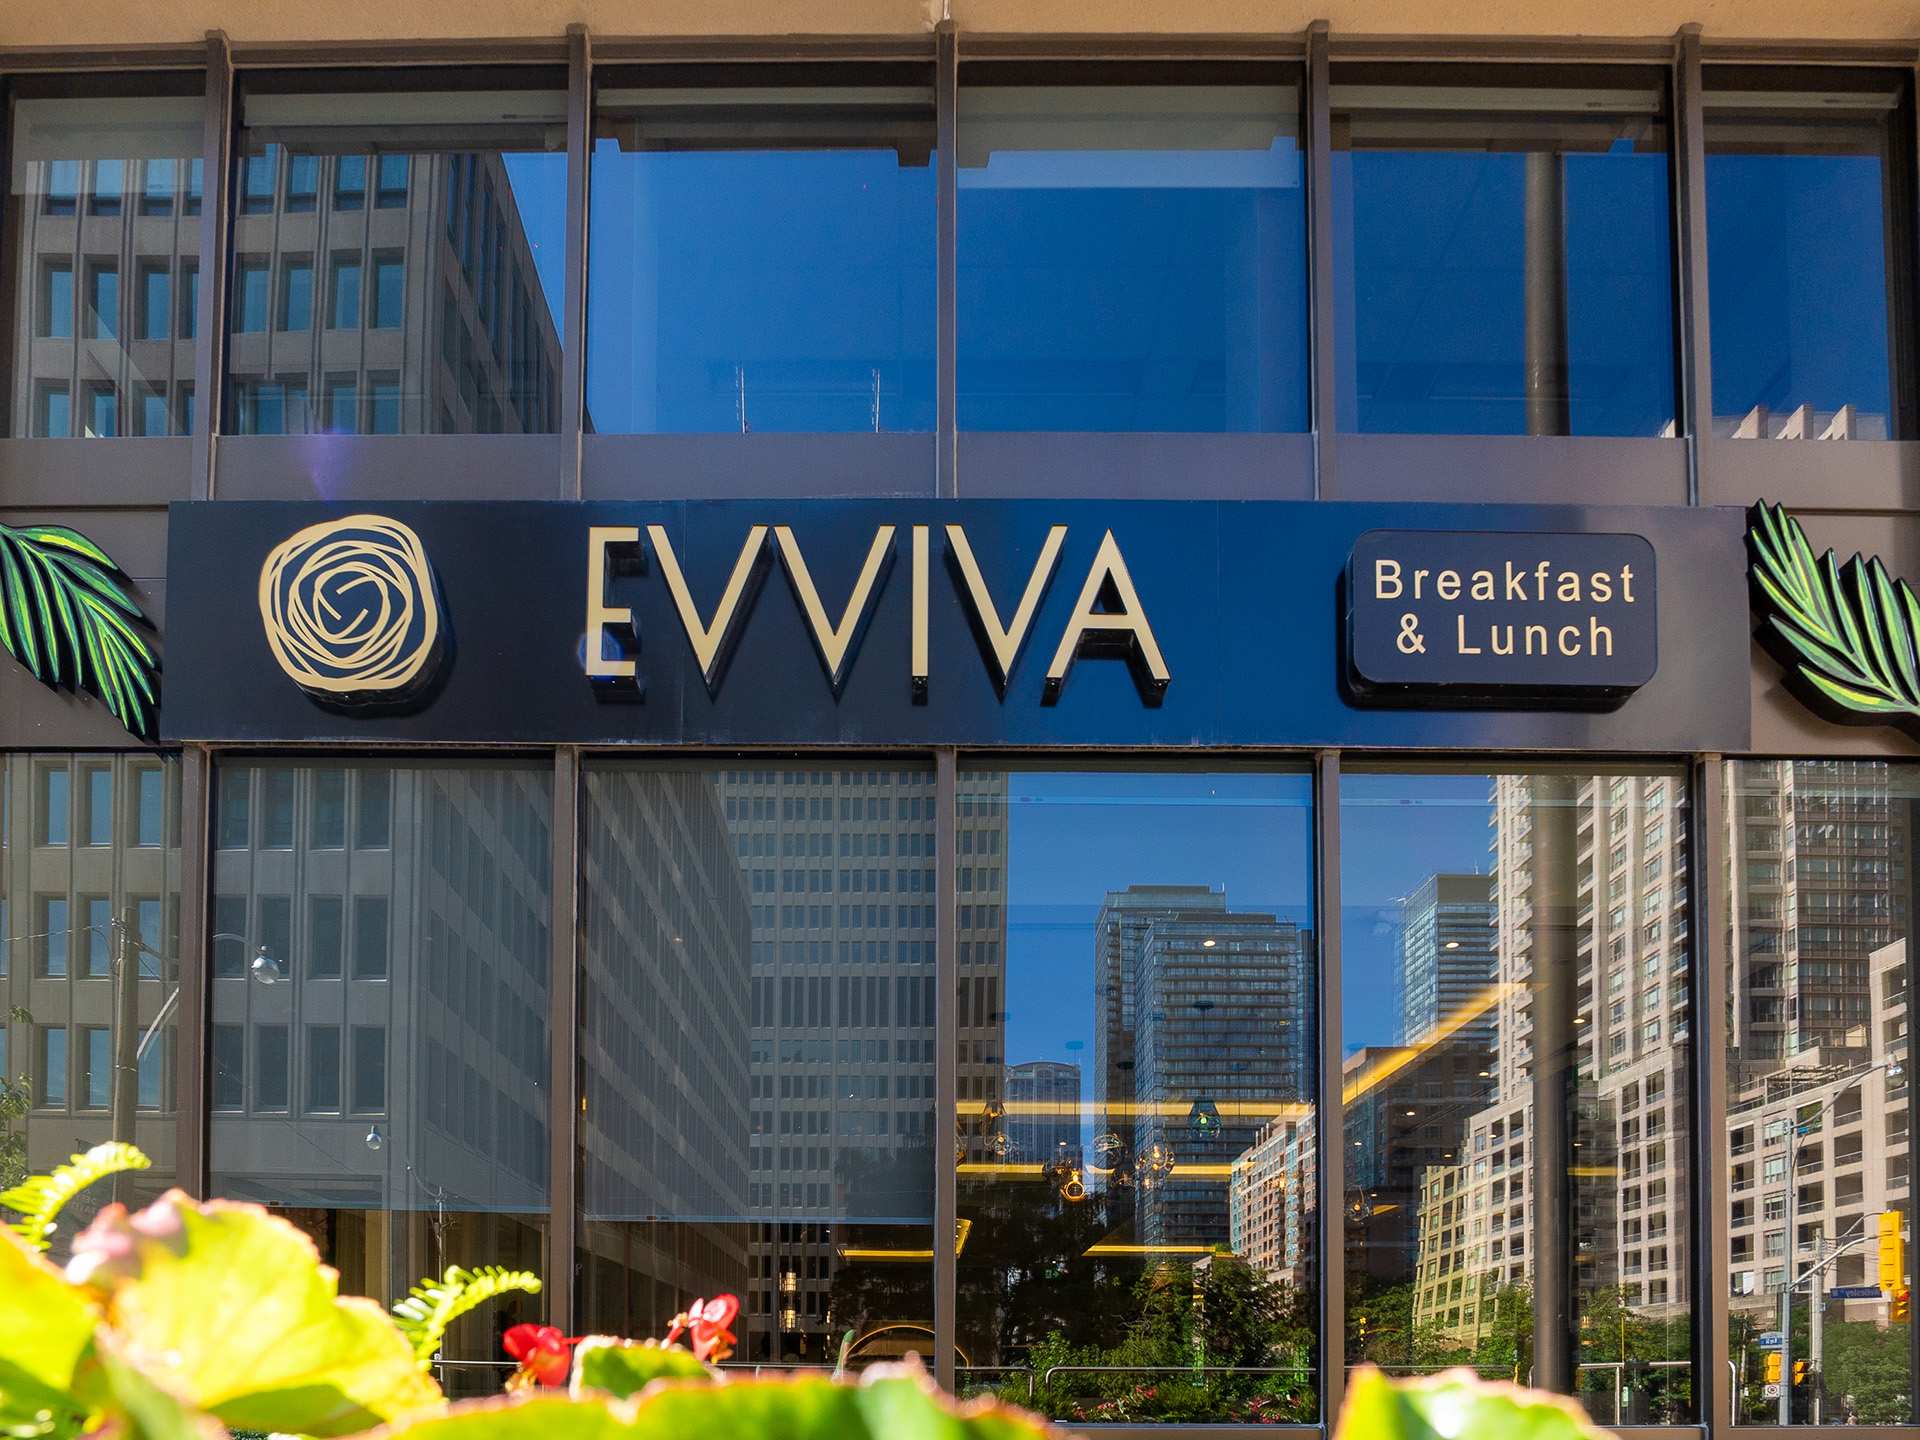 The best brunch in Toronto | The outside sign at Evviva on Wellesley